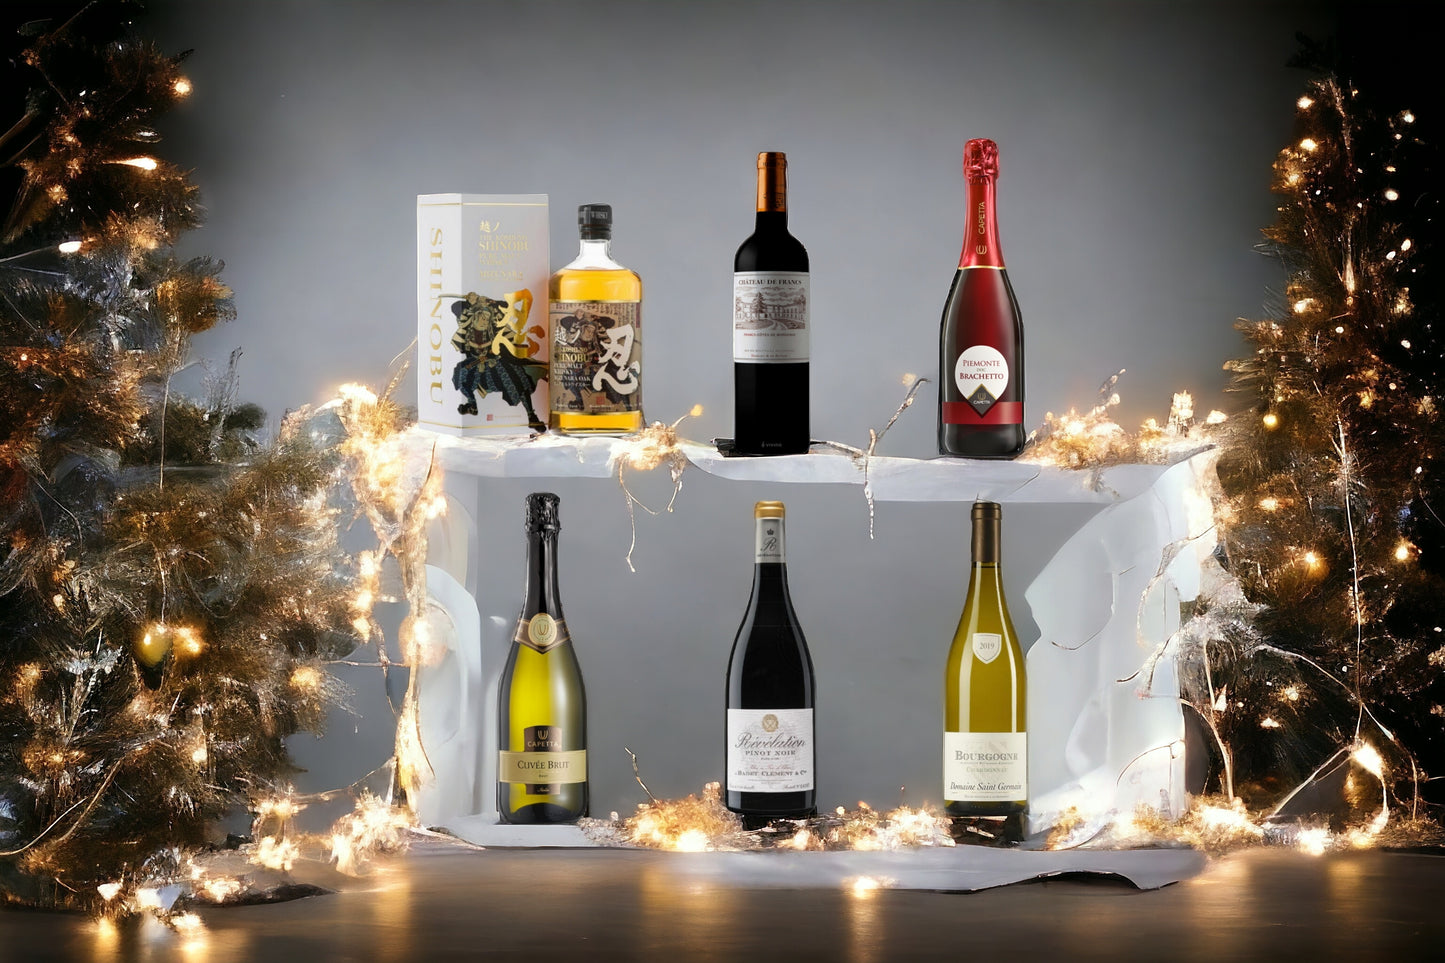 Christmas and Year New all in one Crazy Sales Bundle whisky Lillion Wine Offer special offer